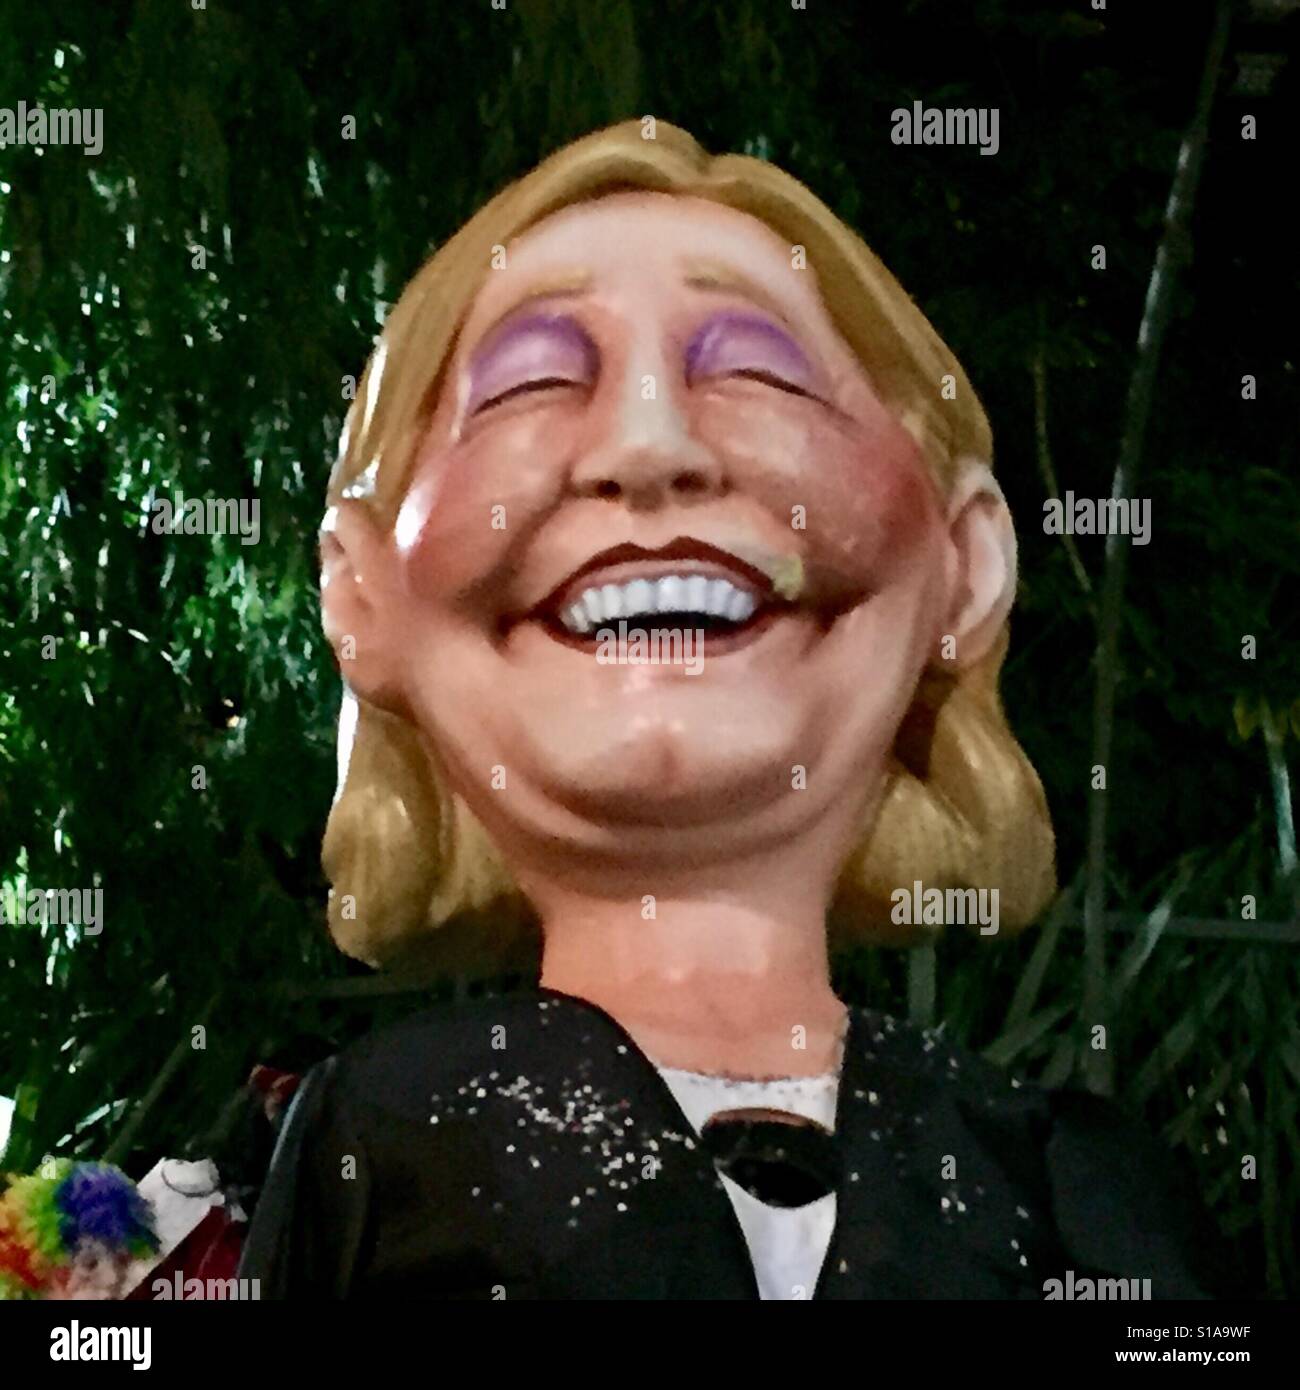 Papier-mâché model of French presidential candidate, Marine Le Pen during the Nice Carnaval. Stock Photo